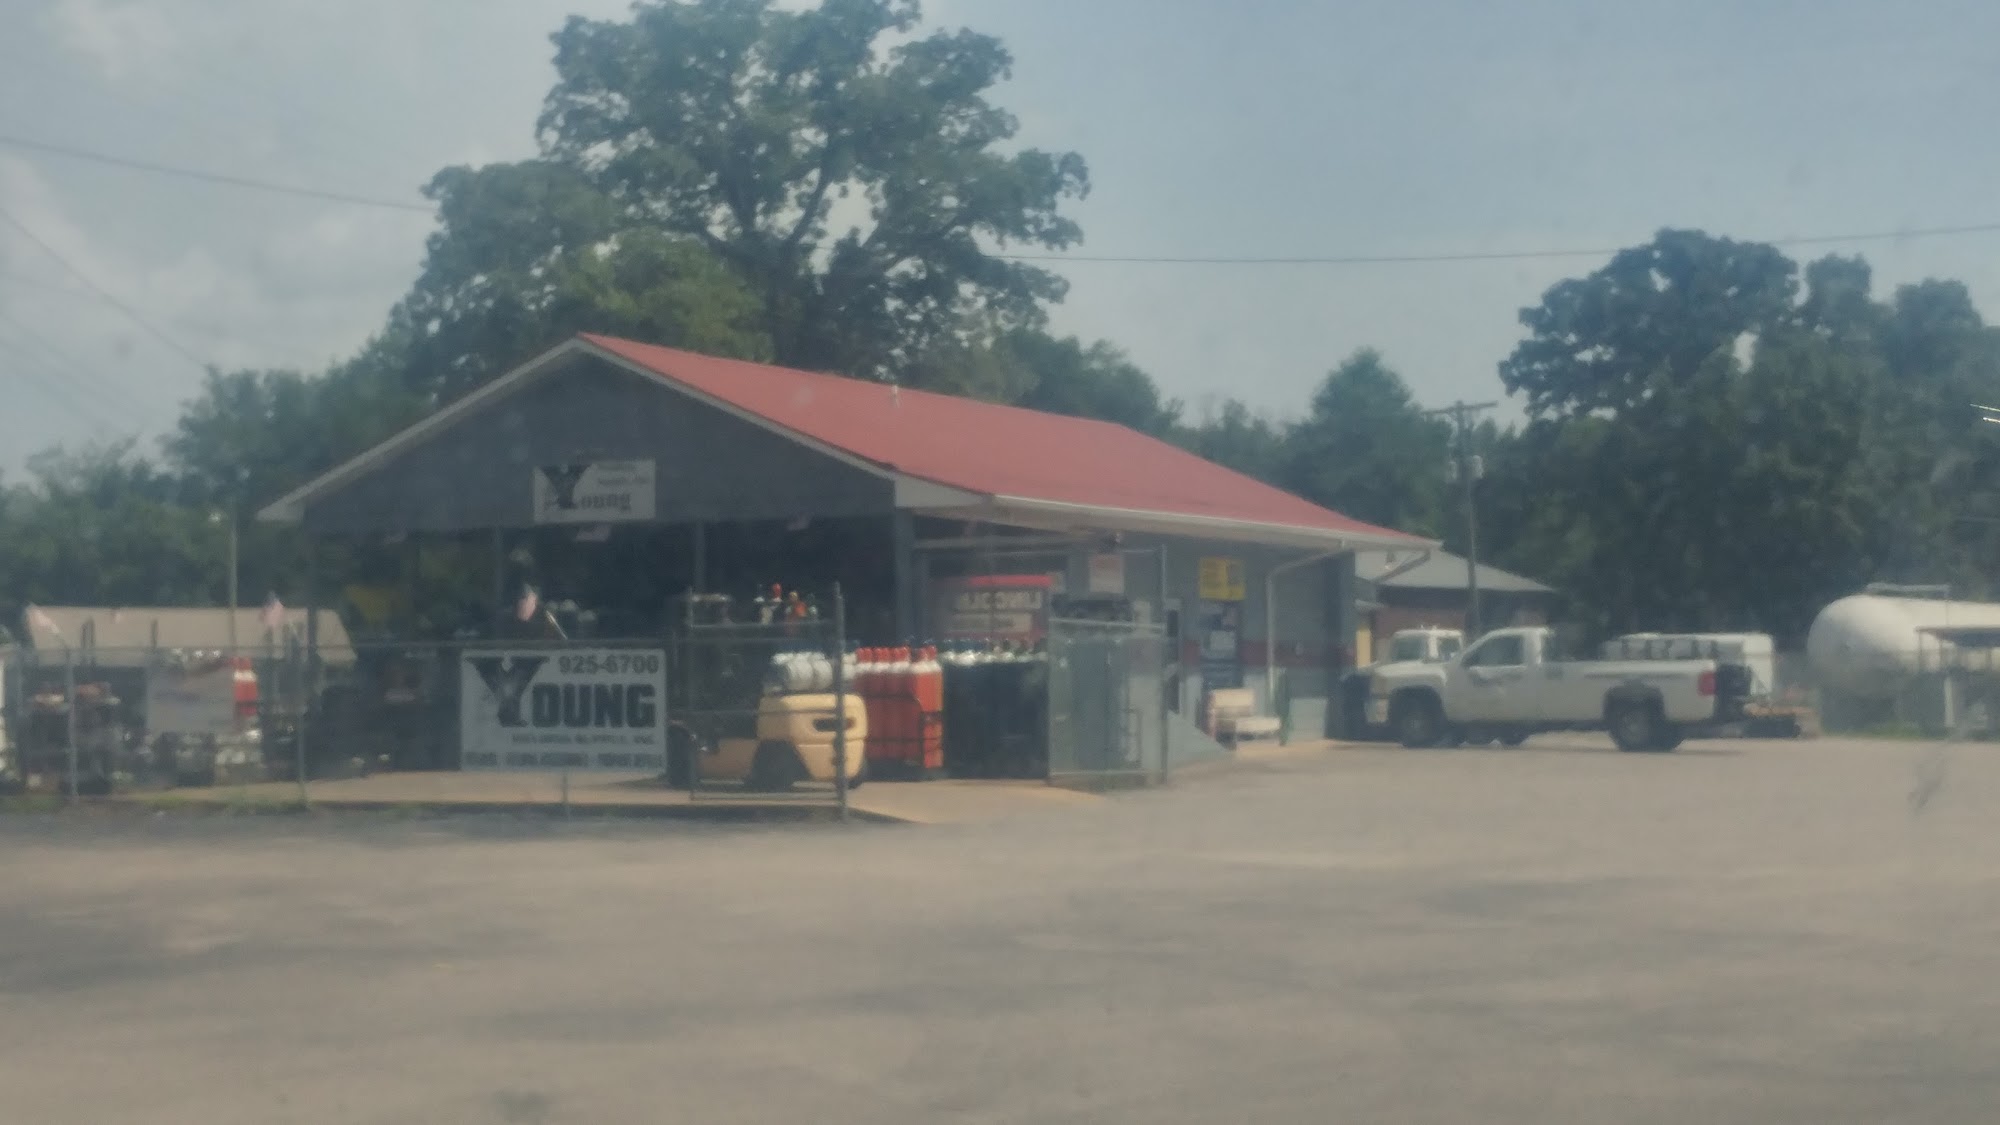 Young Welding Supply 460 Pinhook Dr, Savannah Tennessee 38372